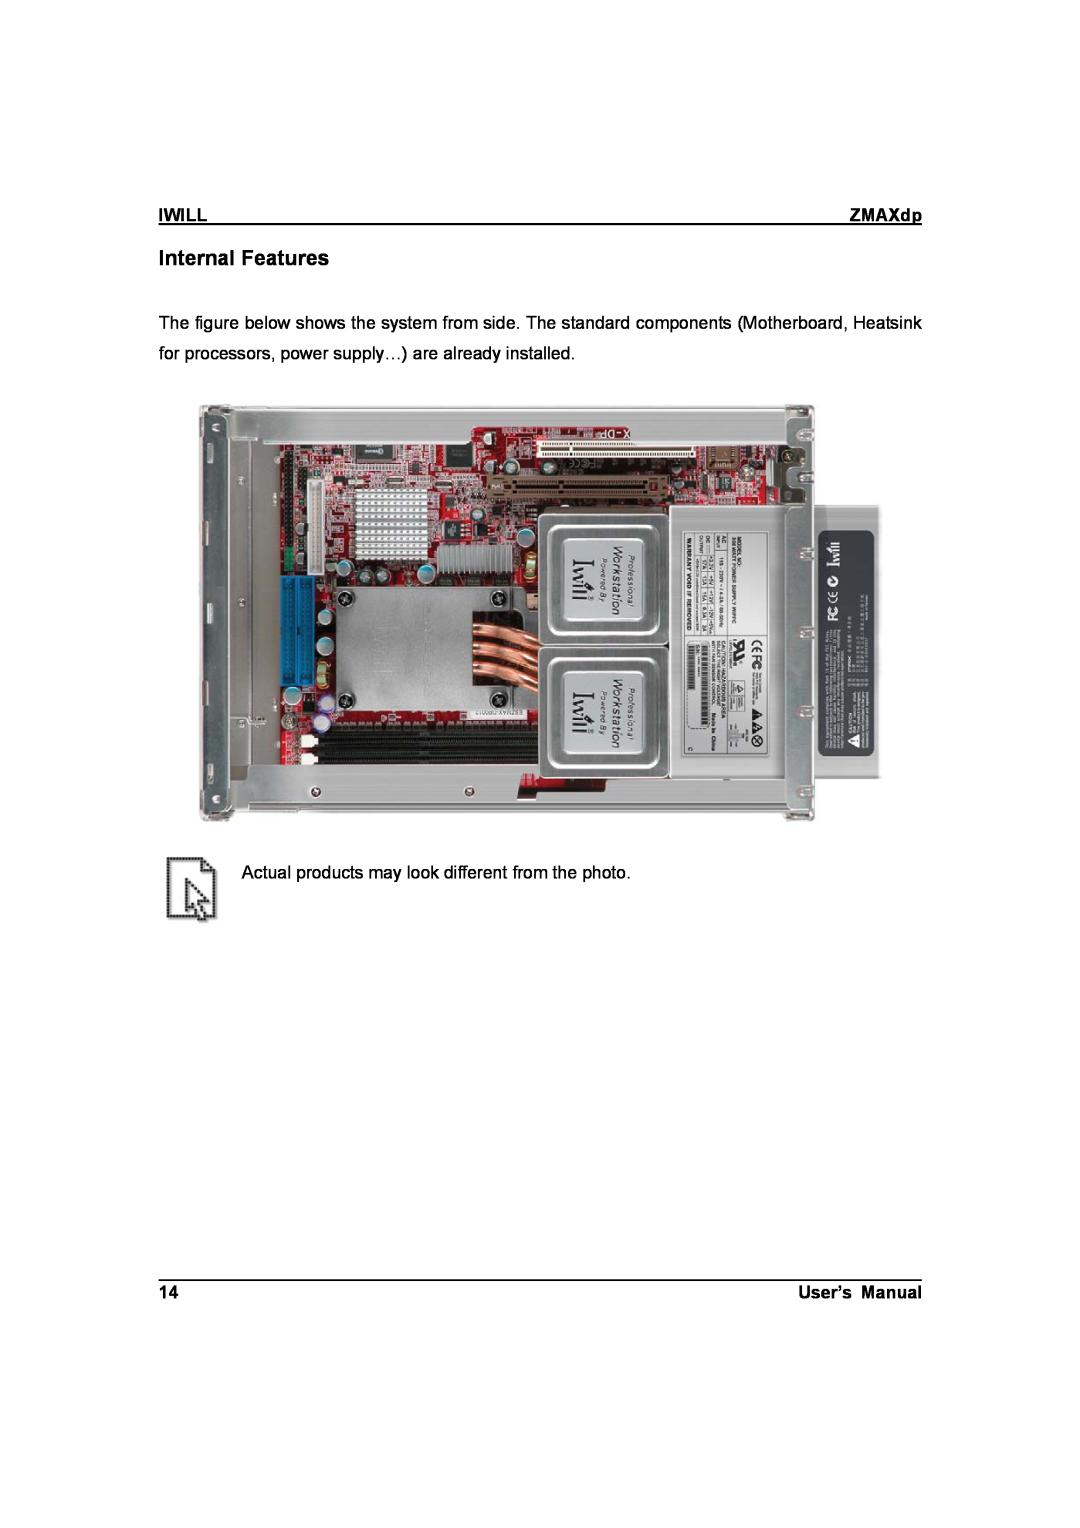 IBM ZMAXdp user manual Internal Features, Iwill, Actual products may look different from the photo, User’s Manual 